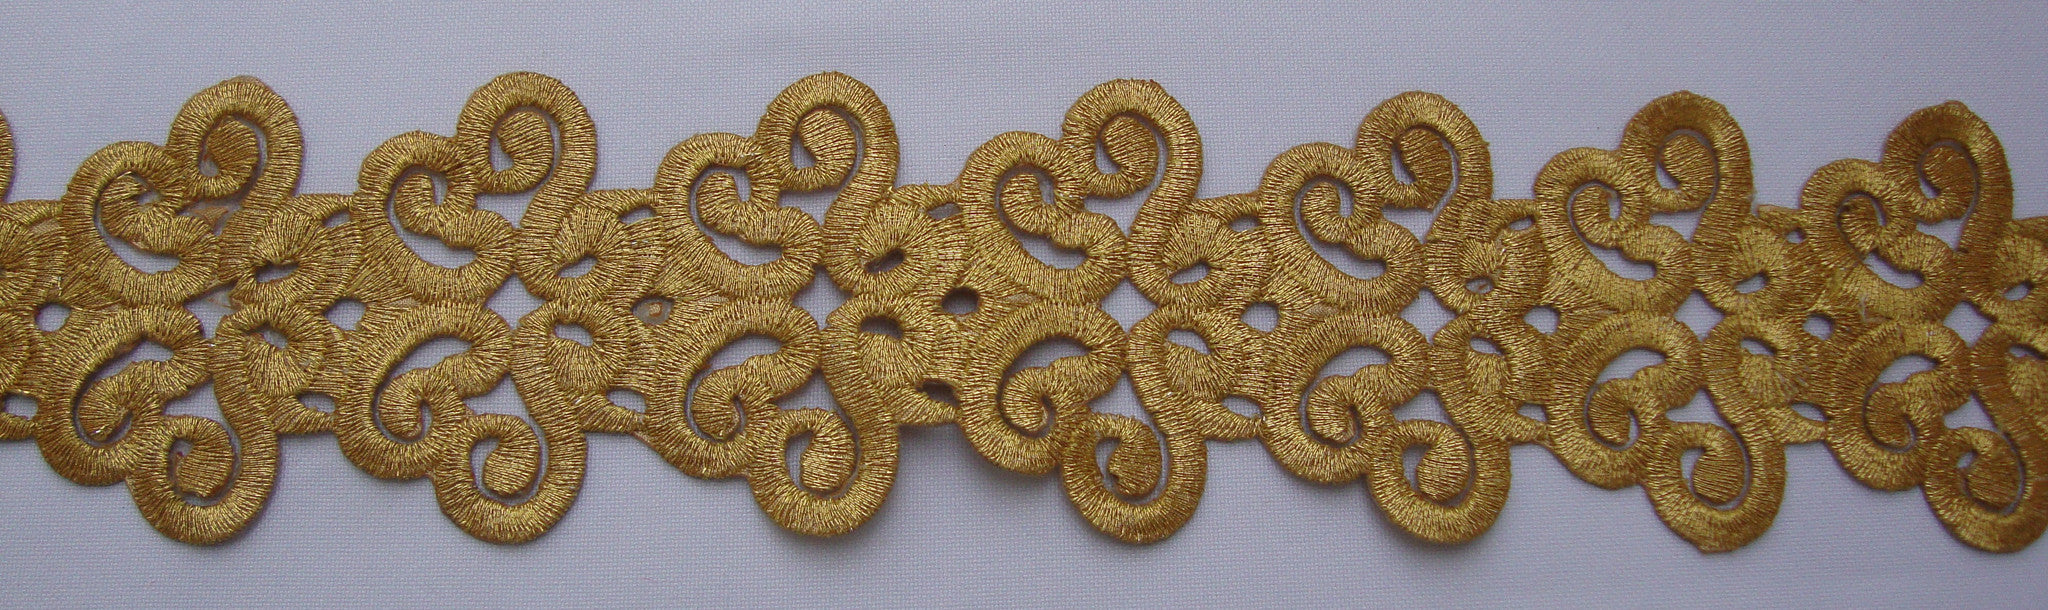 Gold Embroidered Trimming (Sold as 1.5 yard piece)